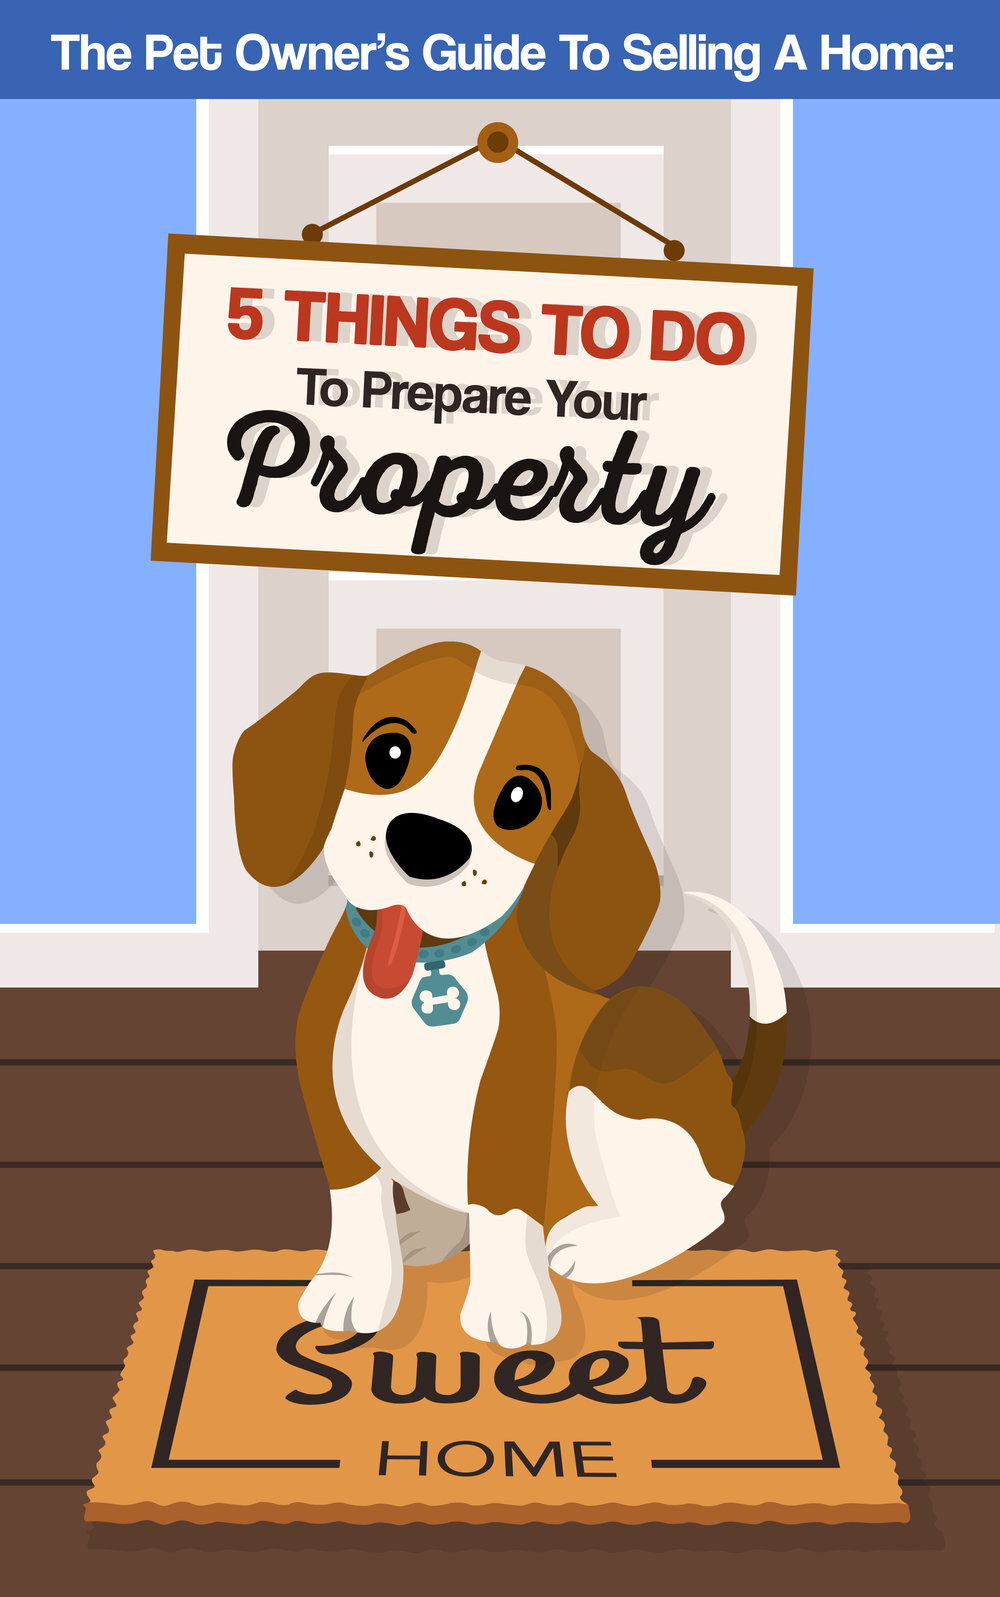 The Pet Owner's Guide To Selling A Home: 5 Things To Do To Prepare Your Property